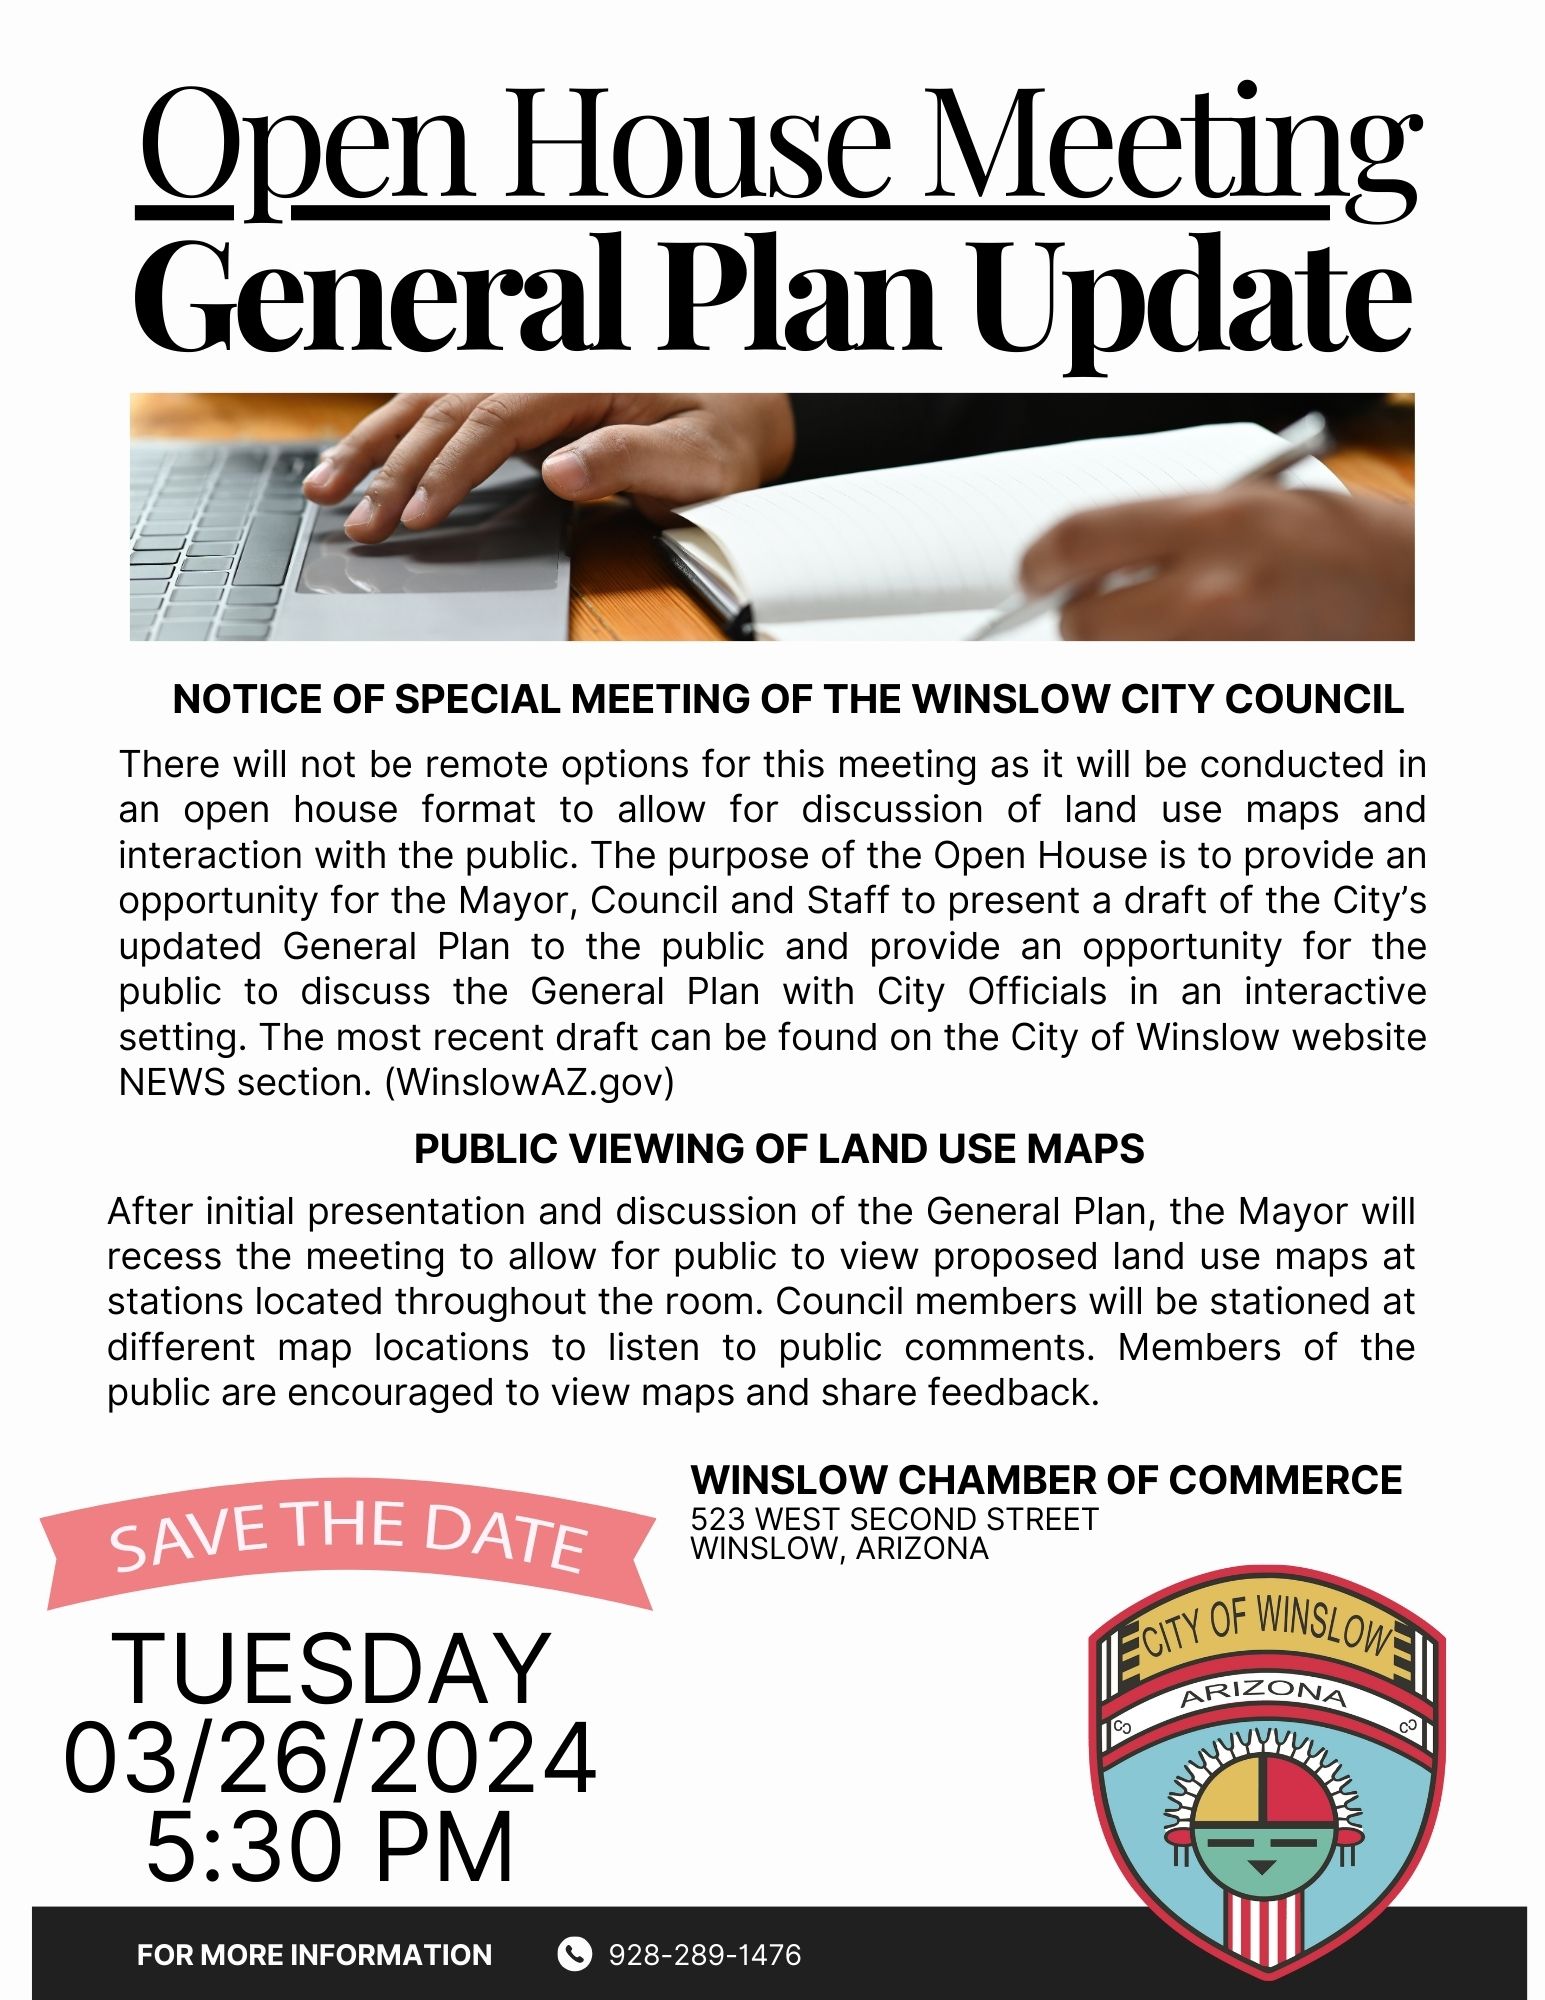 Open House Meeting: General Plan Update. March 26th, 2024 at 5:30PM at the Winslow Chamber of Commerce. 523 West Second Street. Winslow, Arizona.